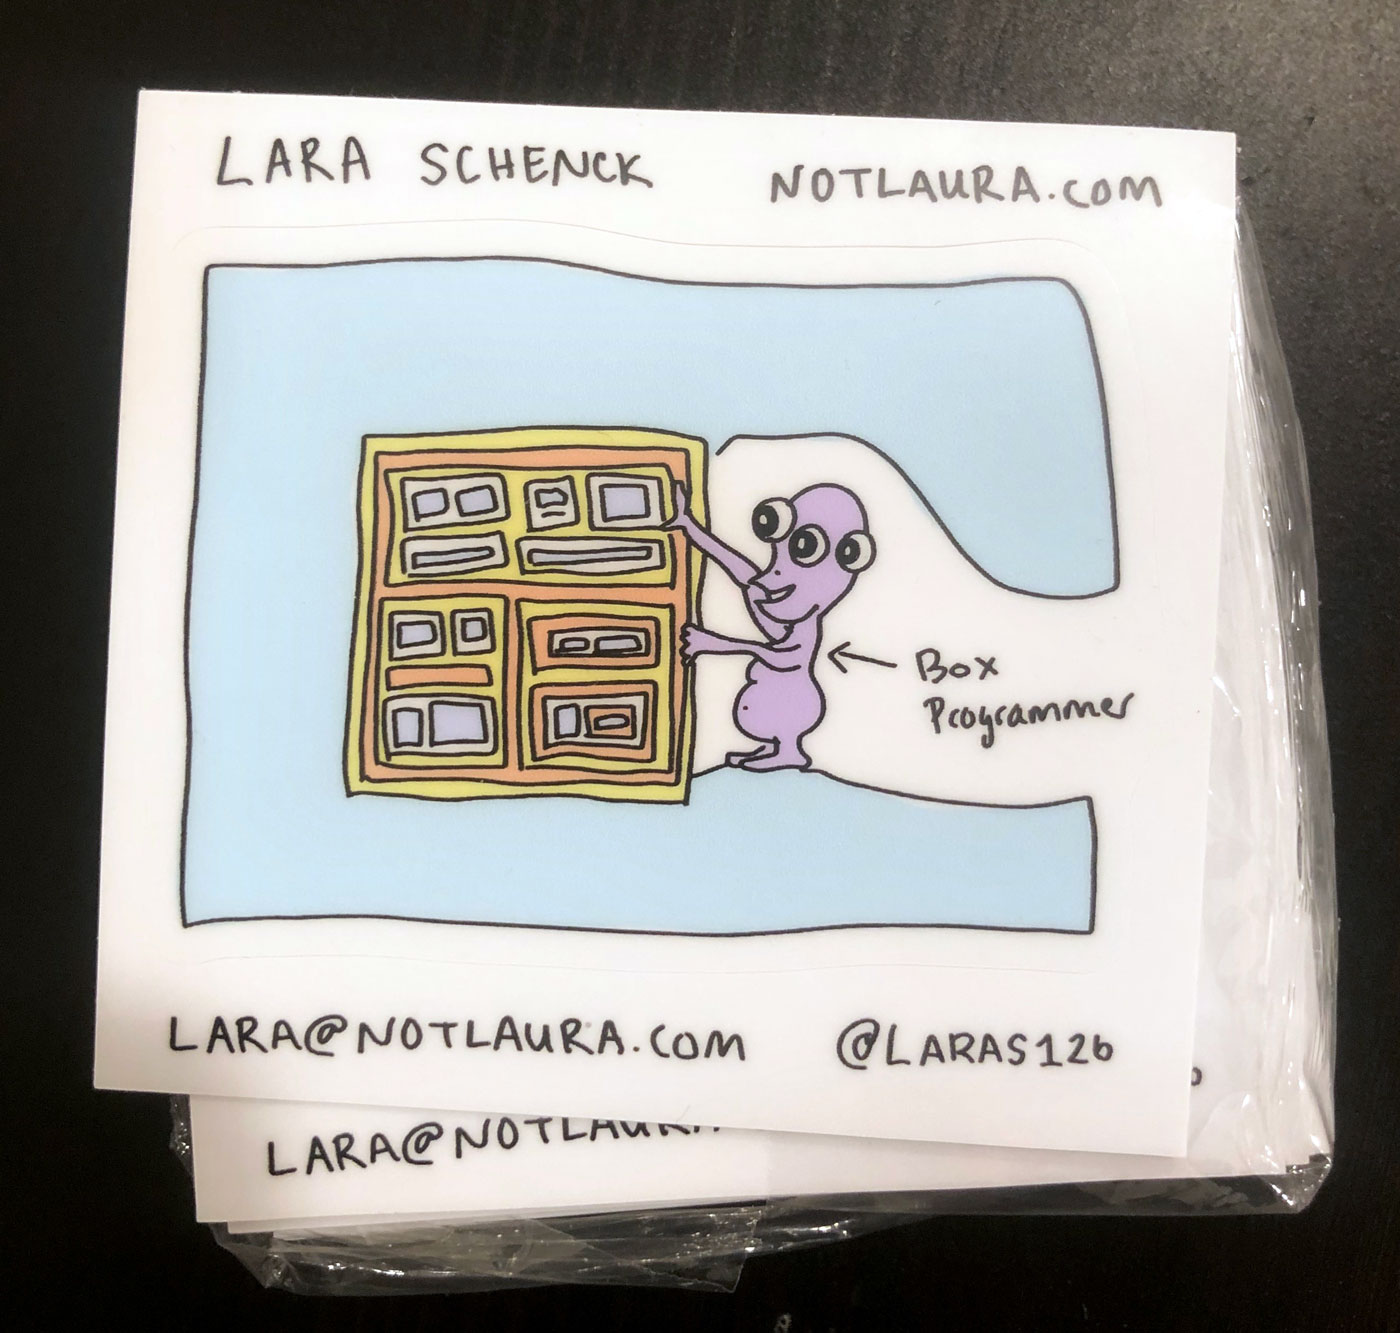 Stickers containing an illustration of a monster doing a puzzle of boxes, and an arrow pointing to the monster saying "Box Programmer" and Lara's information